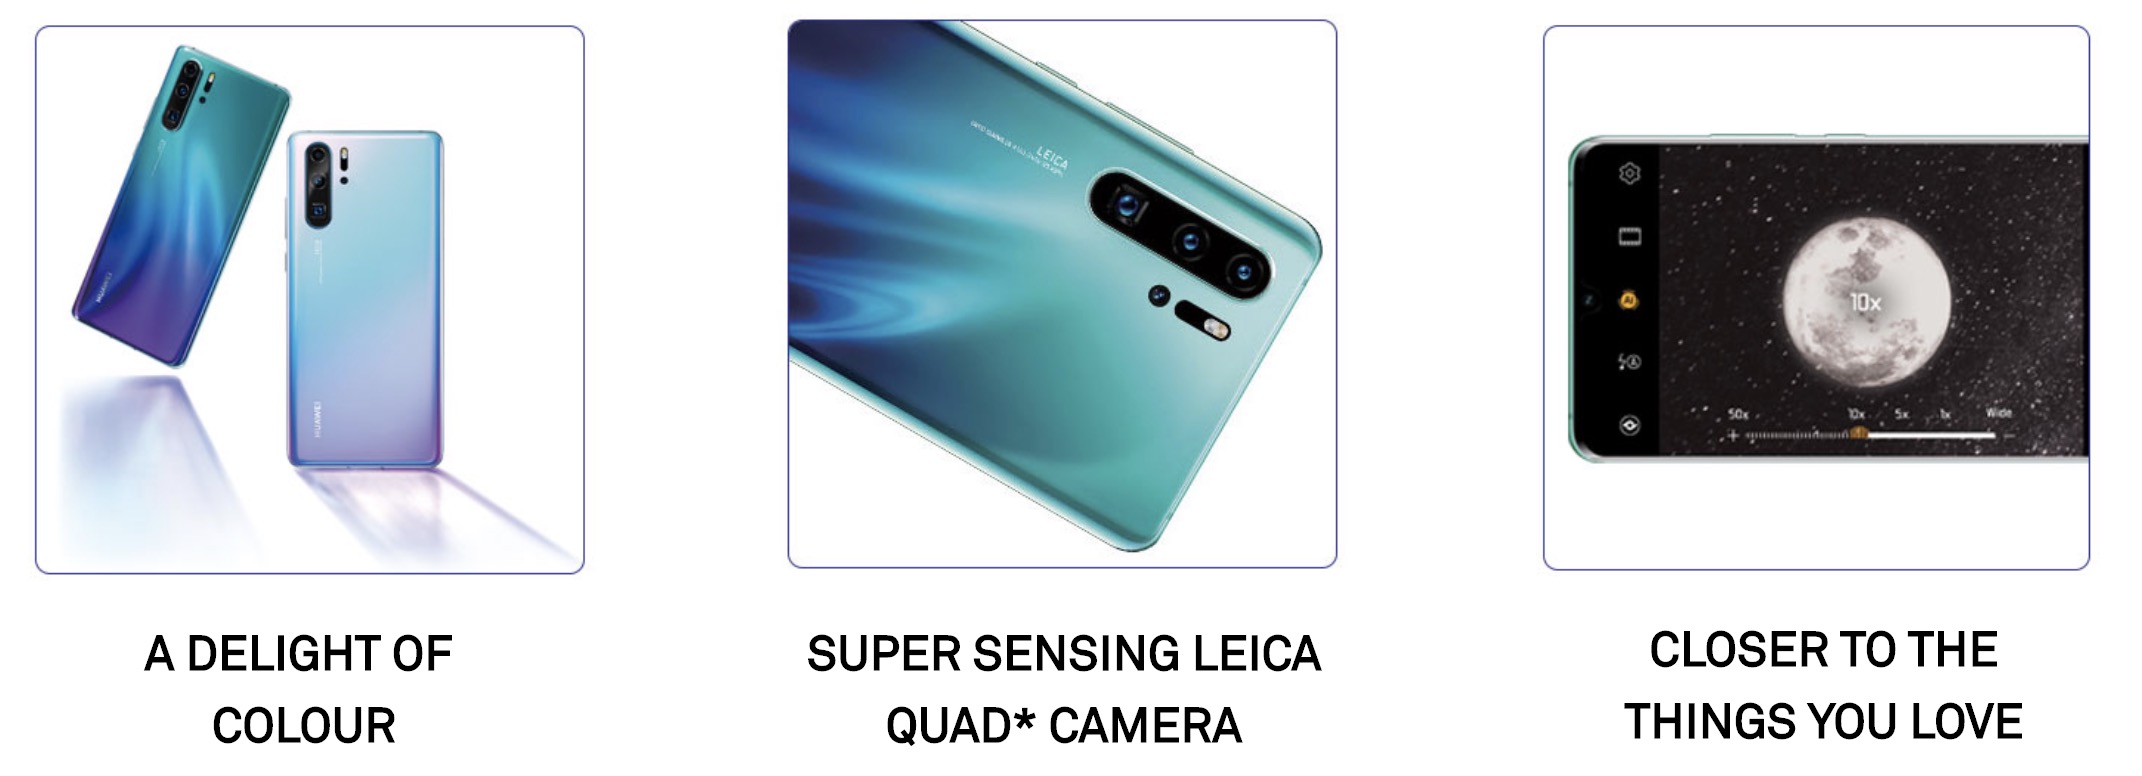 huawei p30 firme fournit details cles camera 1